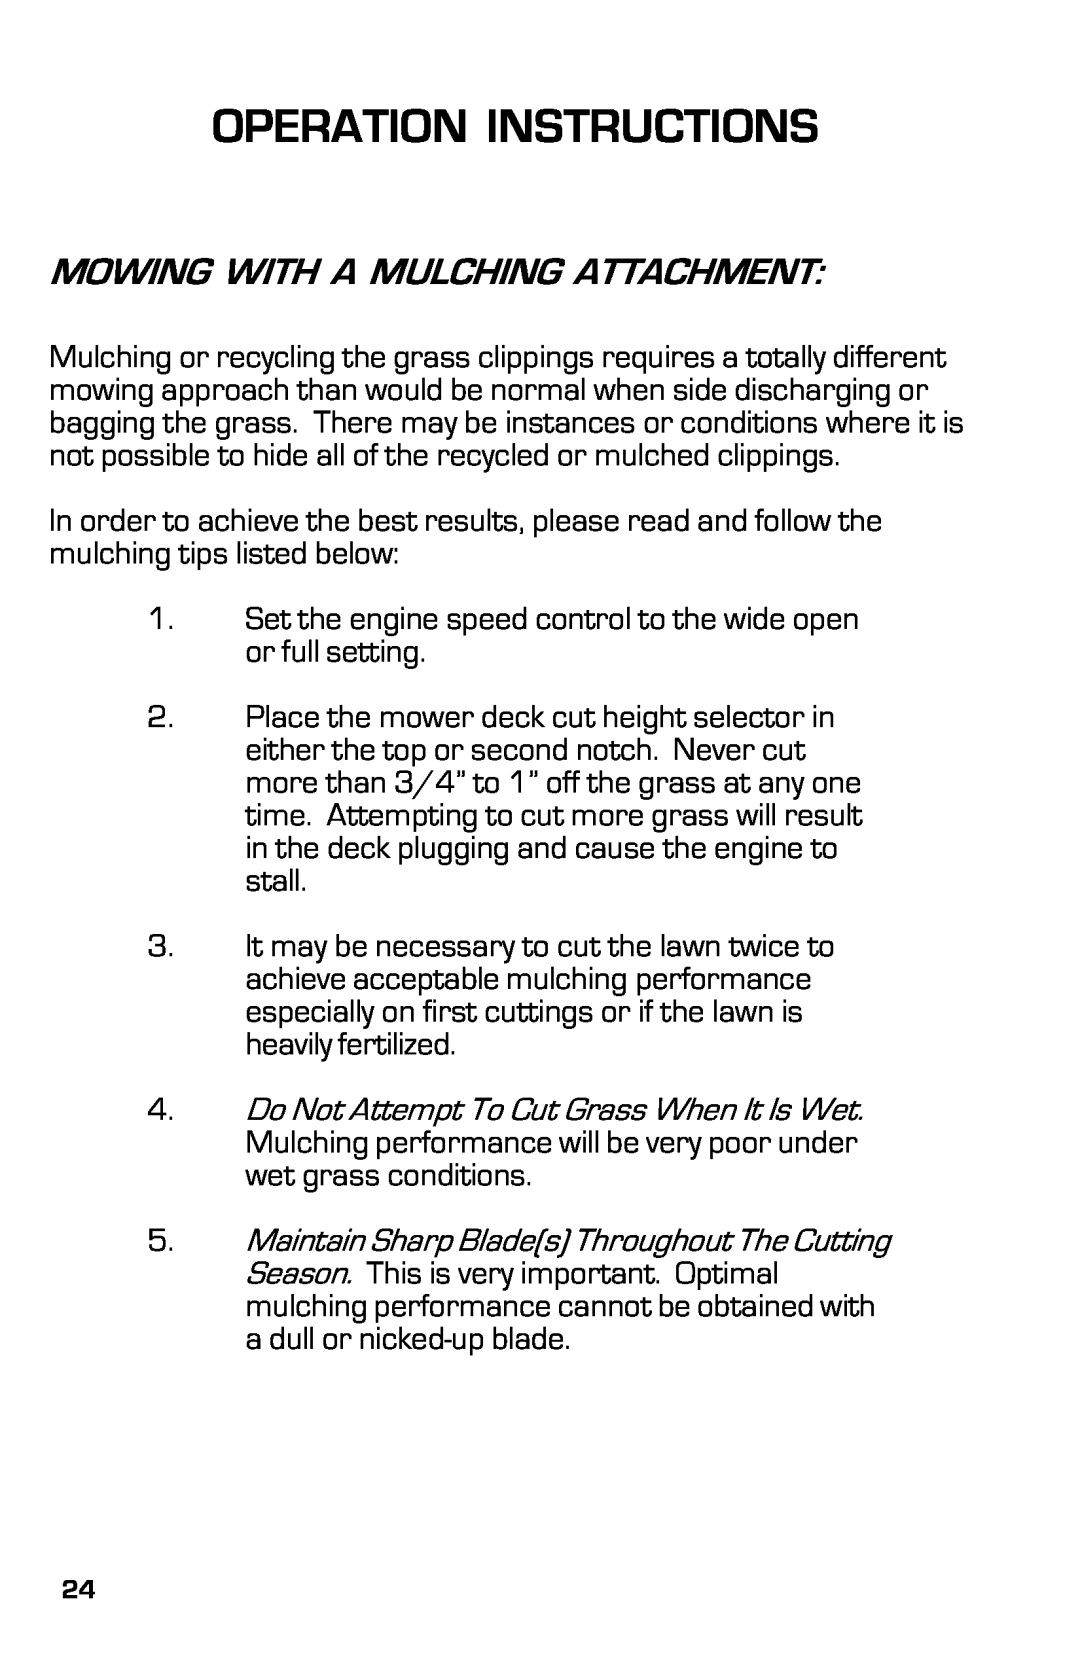 Dixon ZTRCLASSIC manual Mowing With A Mulching Attachment, Operation Instructions 